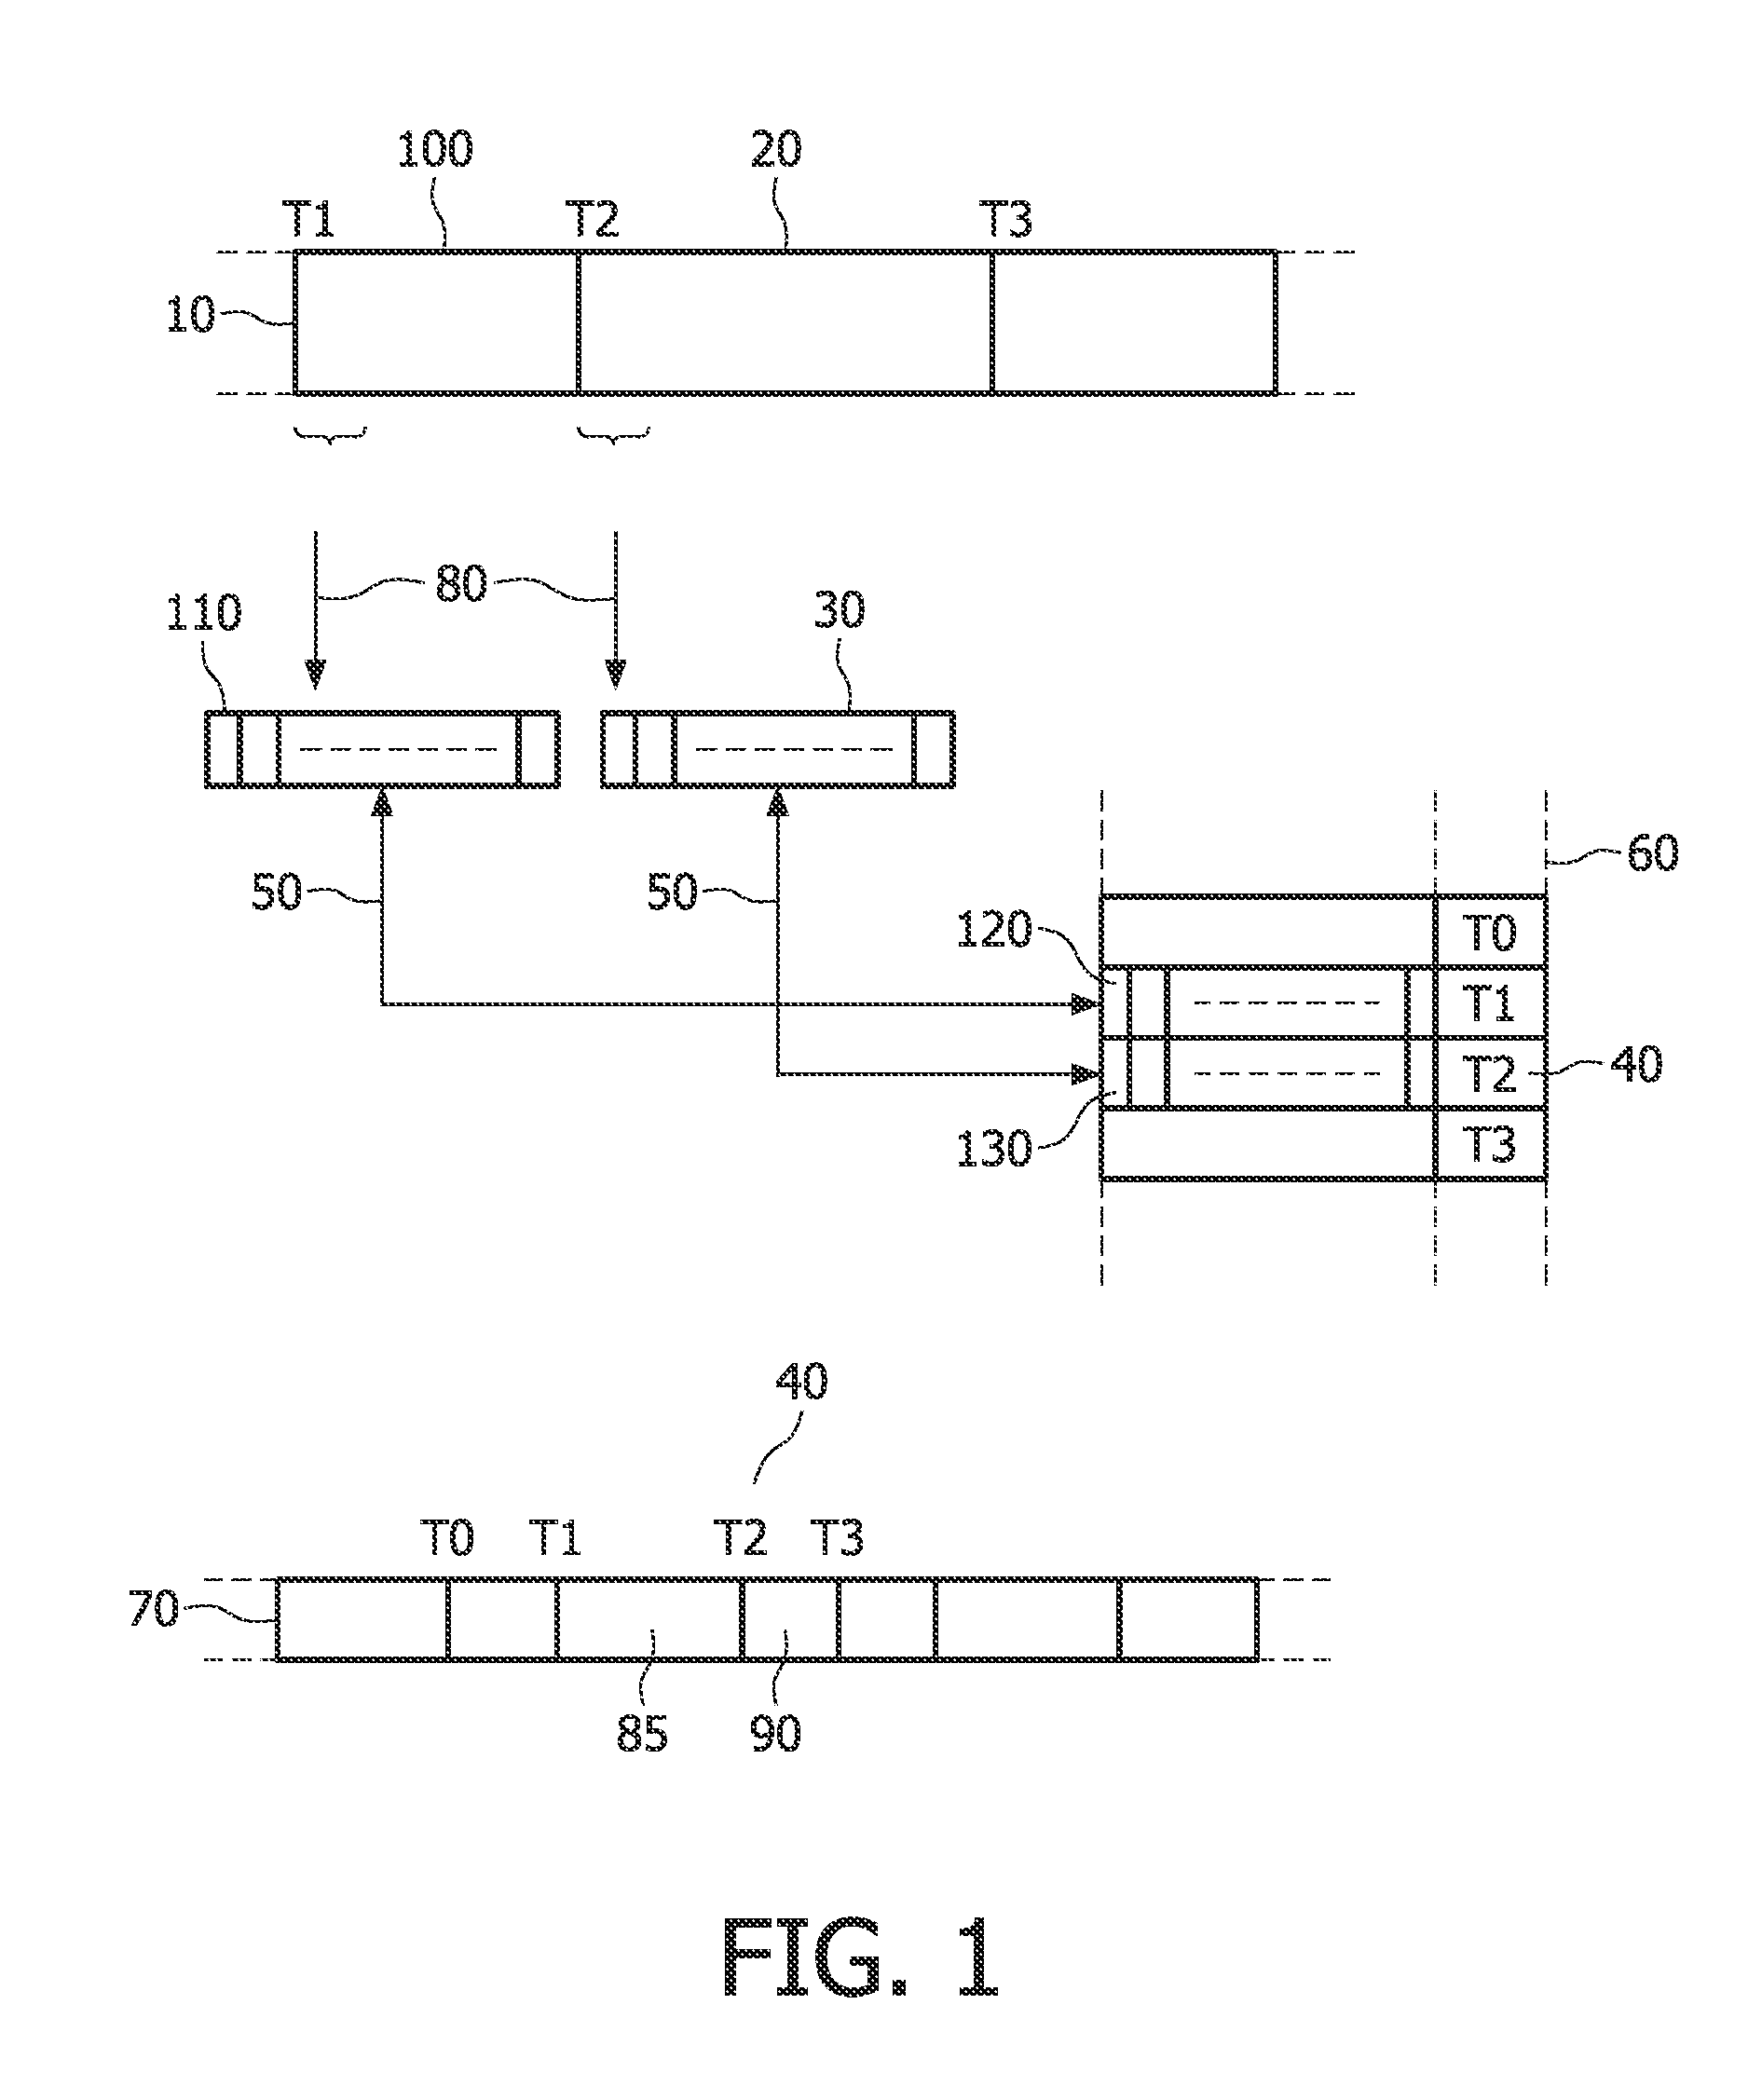 Method for synchronizing a content stream and a script for outputting one or more sensory effects in a multimedia system